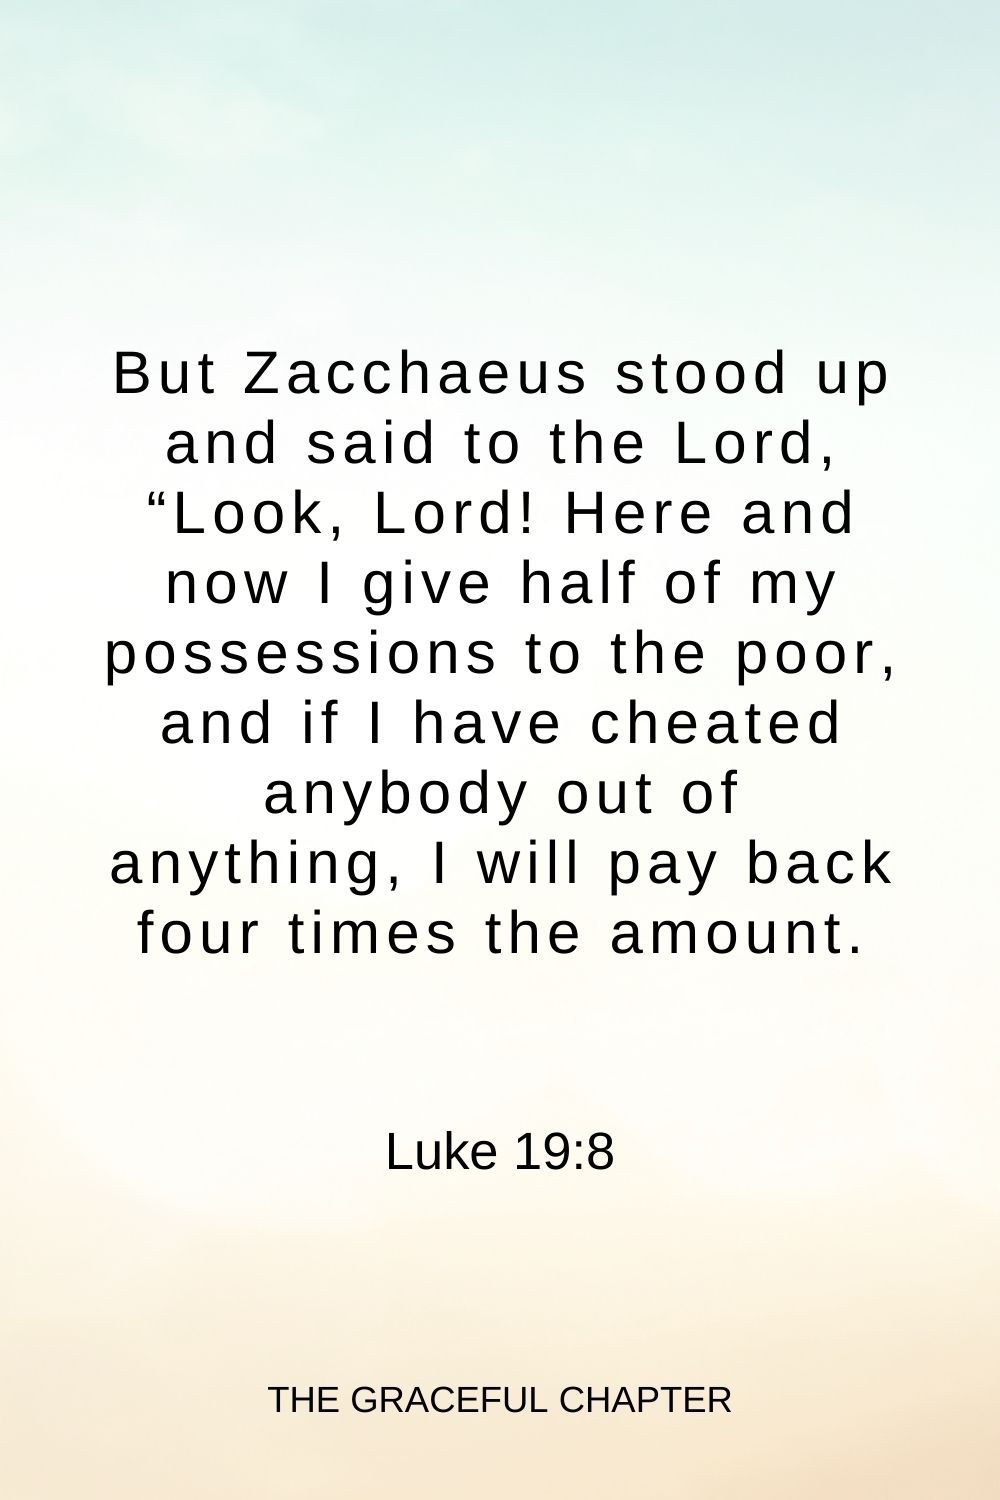 But Zacchaeus stood up and said to the Lord, “Look, Lord! Here and now I give half of my possessions to the poor, and if I have cheated anybody out of anything, I will pay back four times the amount. Luke 19:8